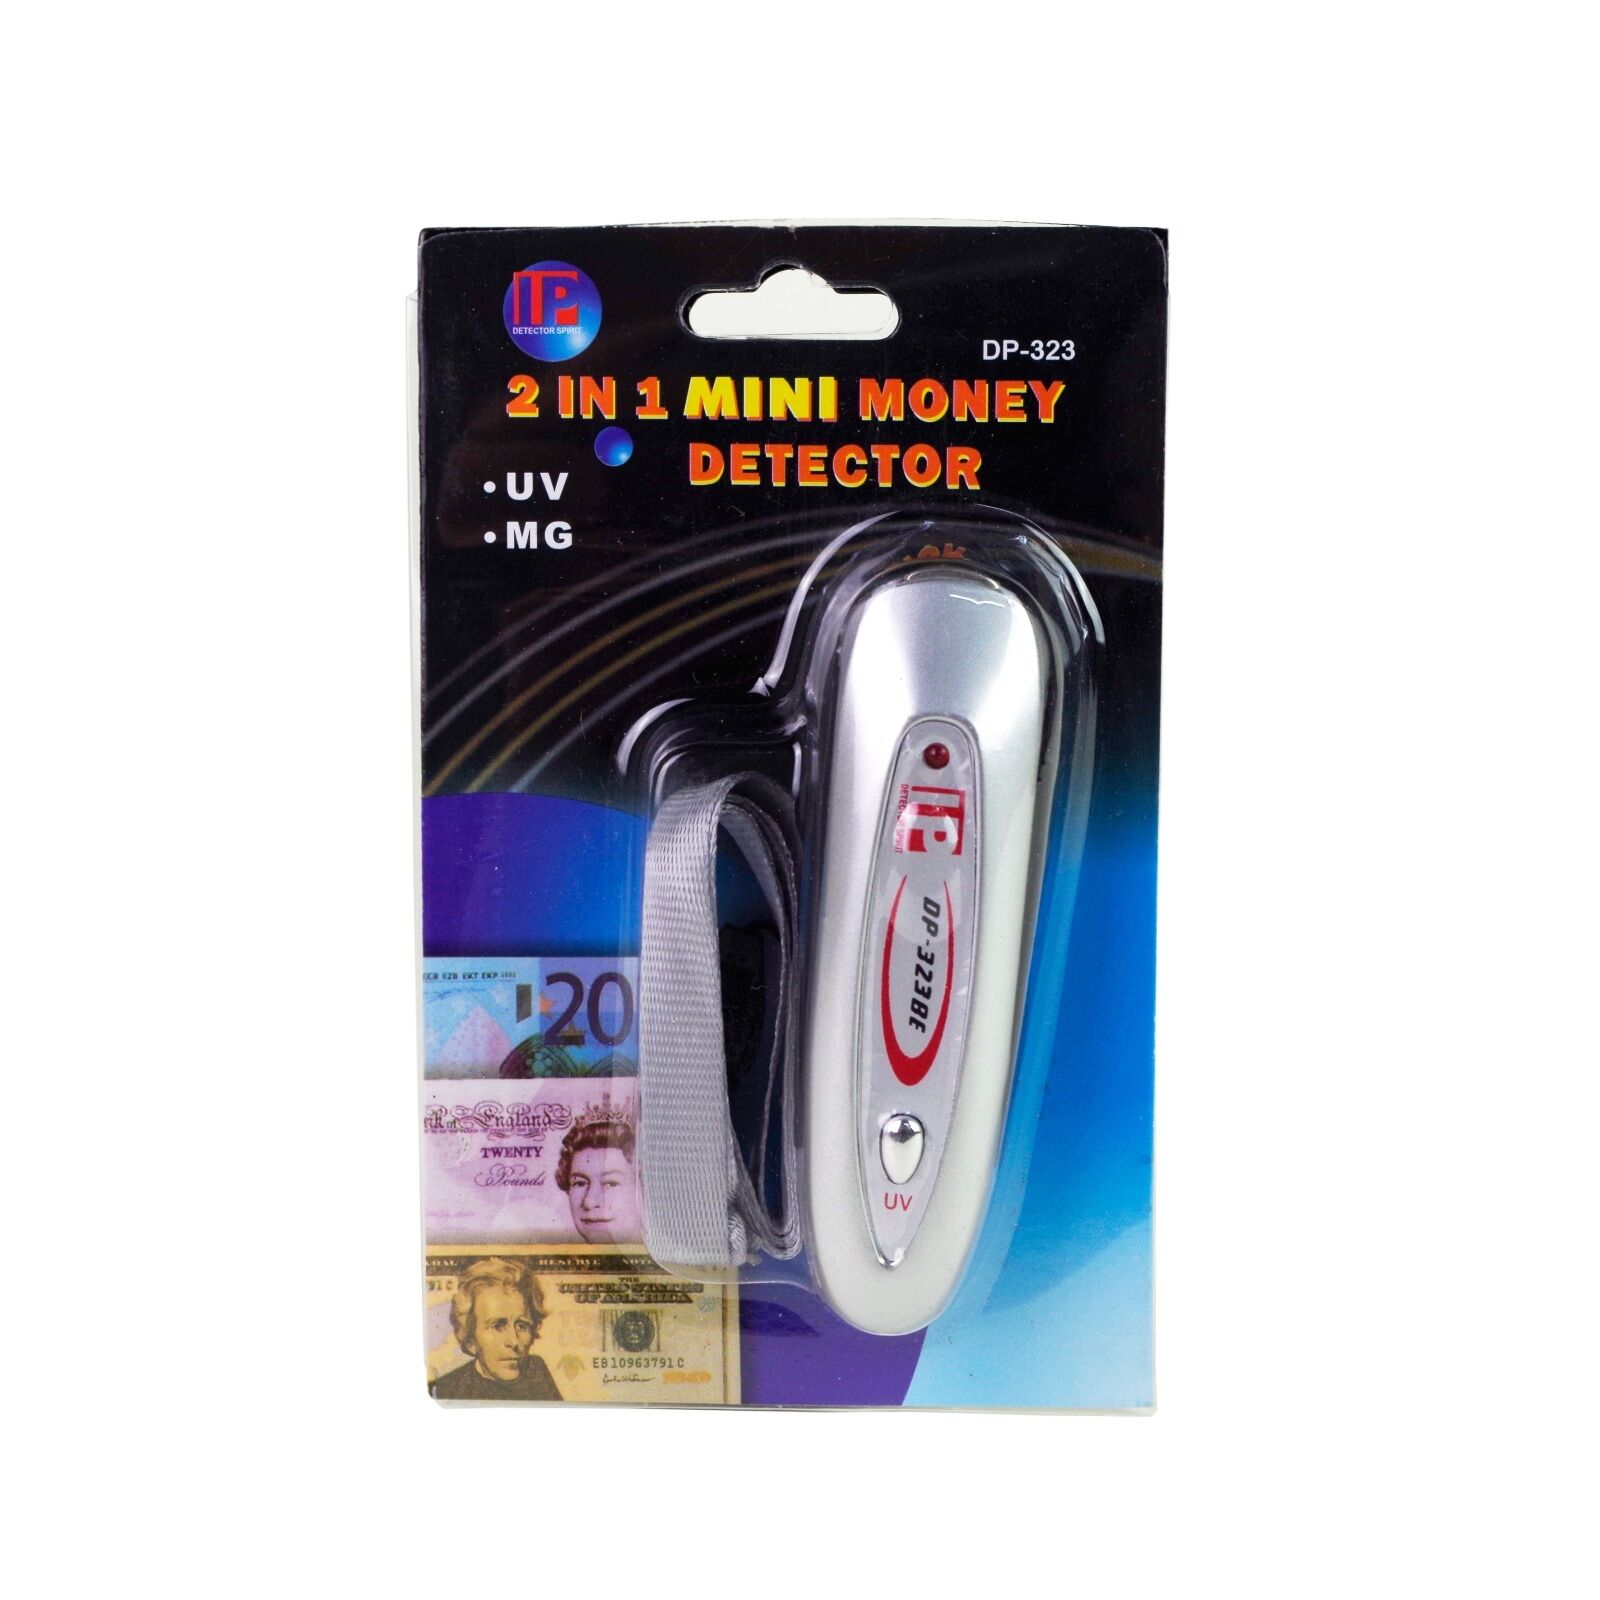 2 in 1 Mini Counterfeit Money Detector Tester Dollar Bill Fake Currency Checker